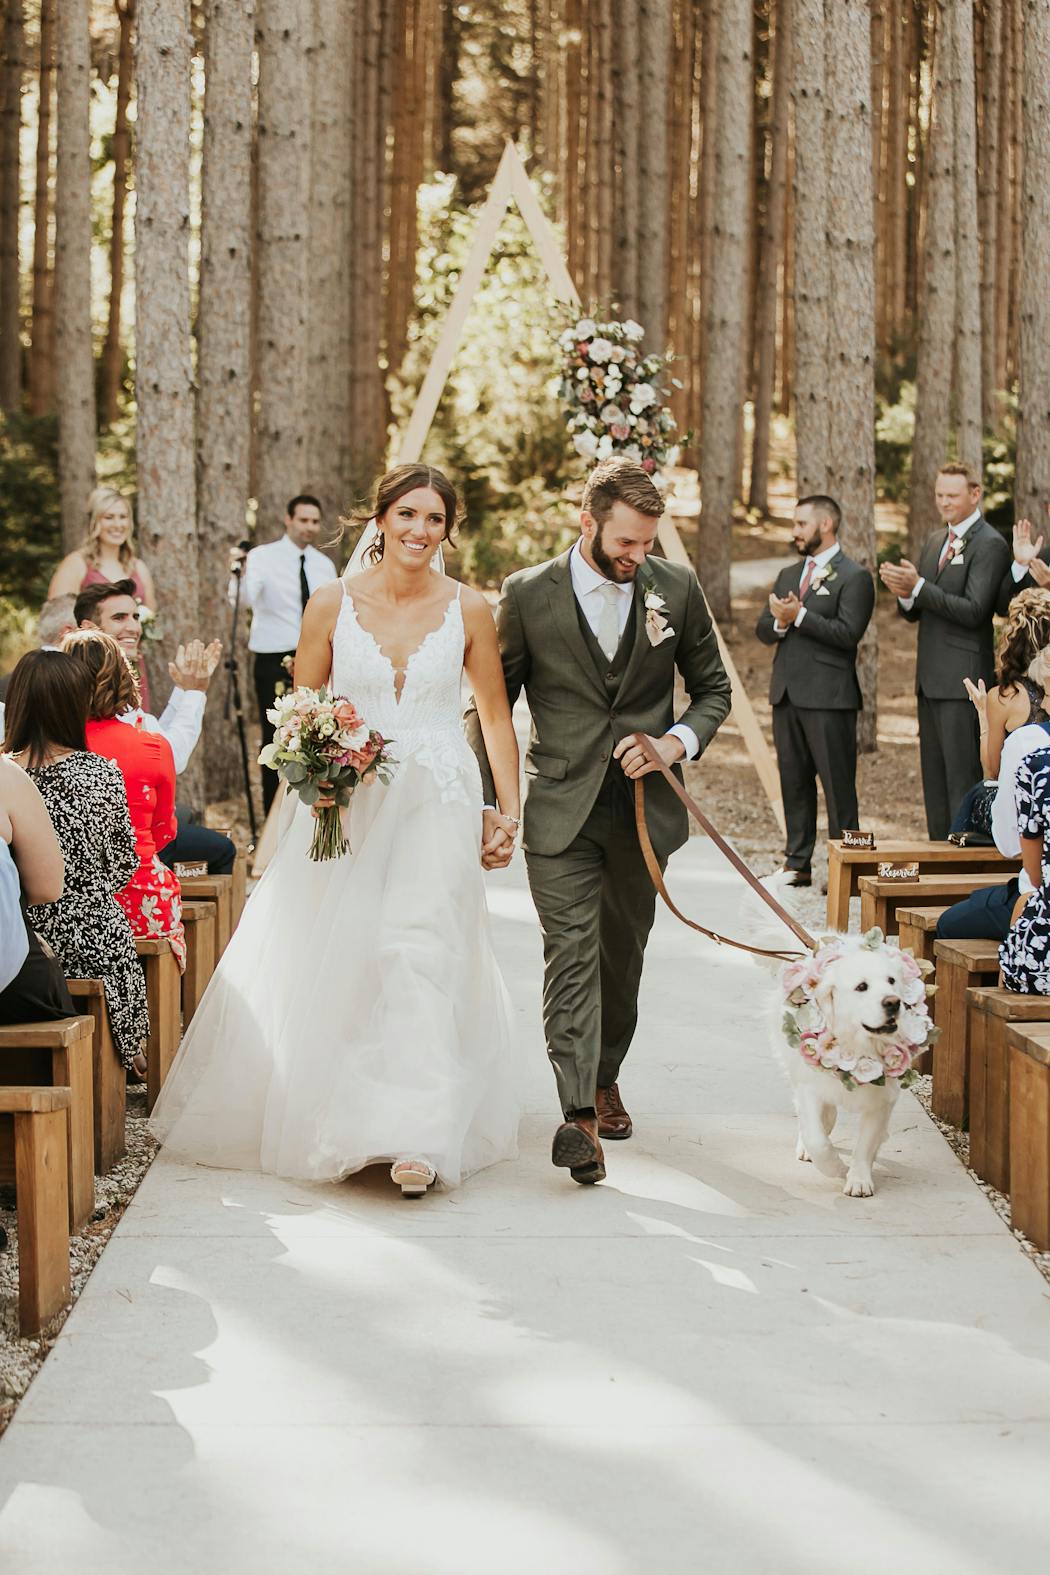 Your dog can be a guest at your wedding if you hire a wedding pet attendant. 